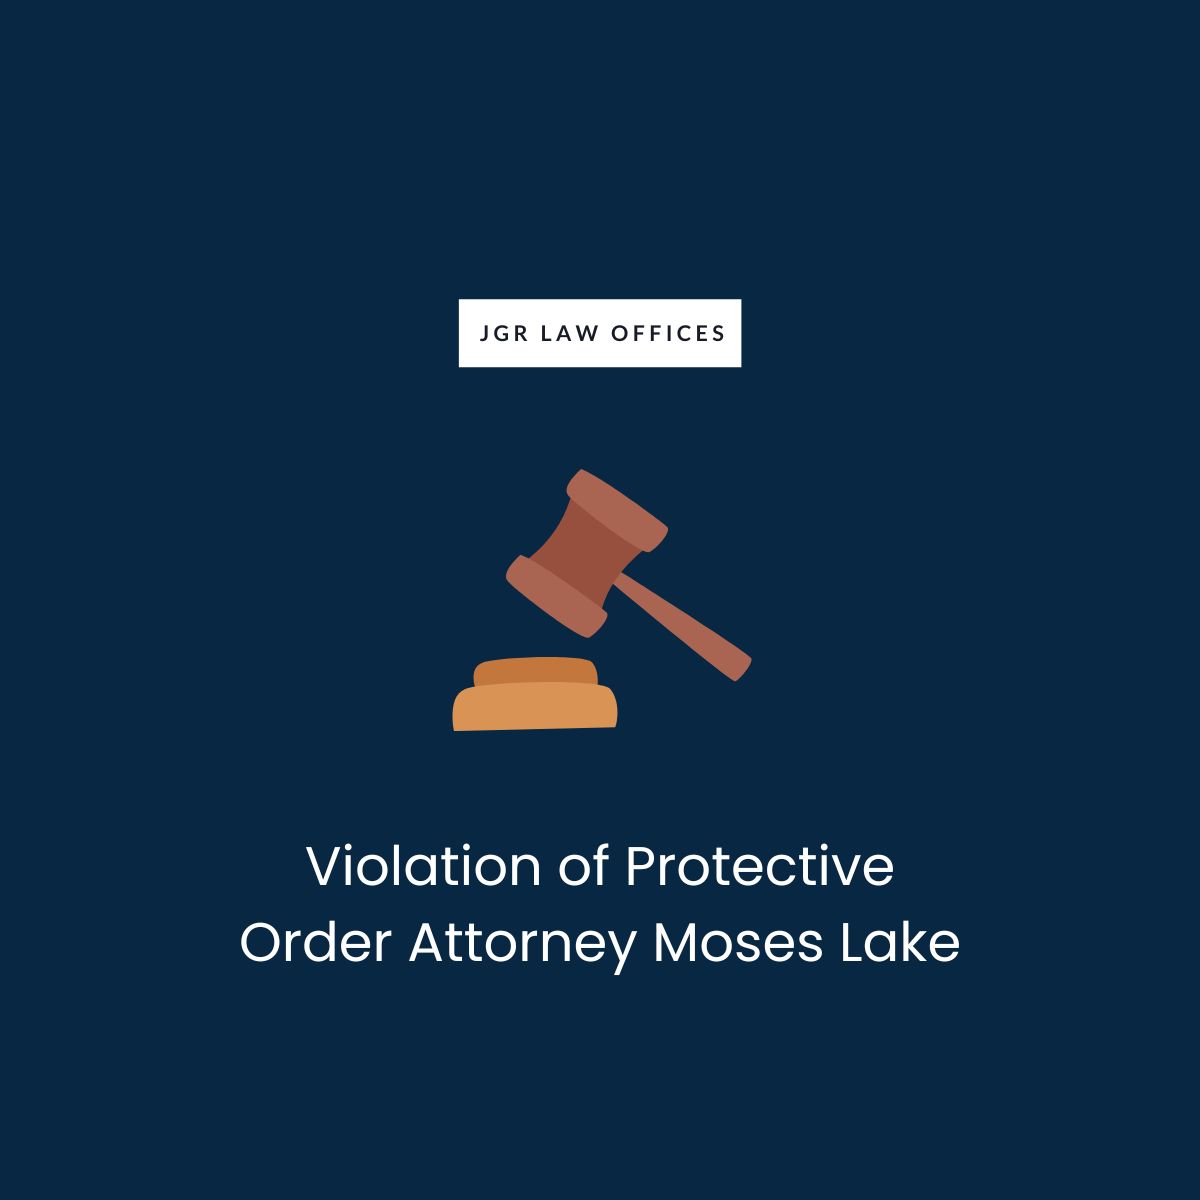 Violation of Protective Order Lawyer Moses Lake Violation of Protective Order Violation of Protective Order